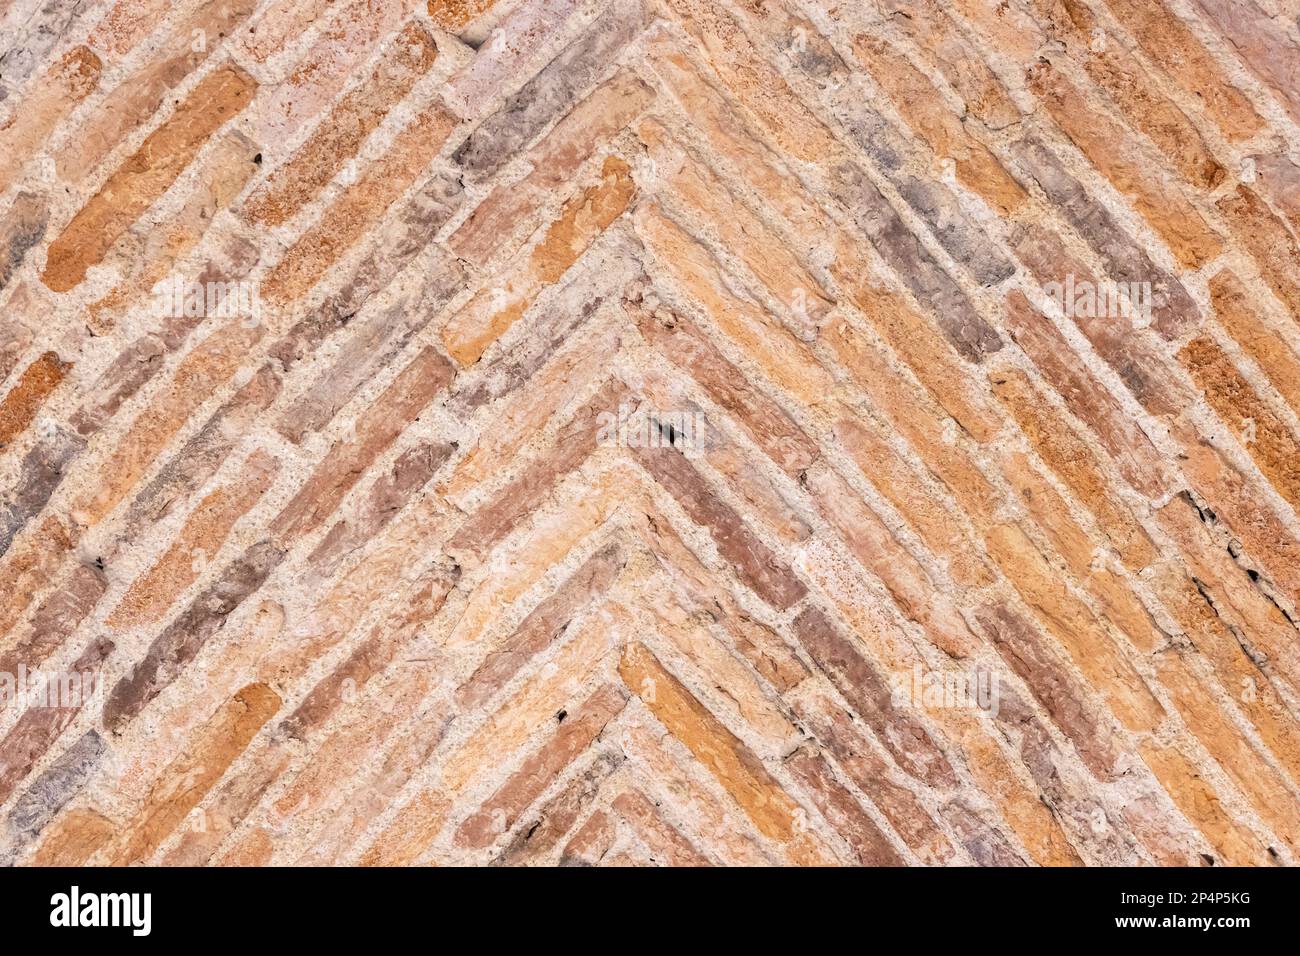 Background of old bricks laid in a herringbone pattern on a vault of a 17th century building. Full frame Stock Photo